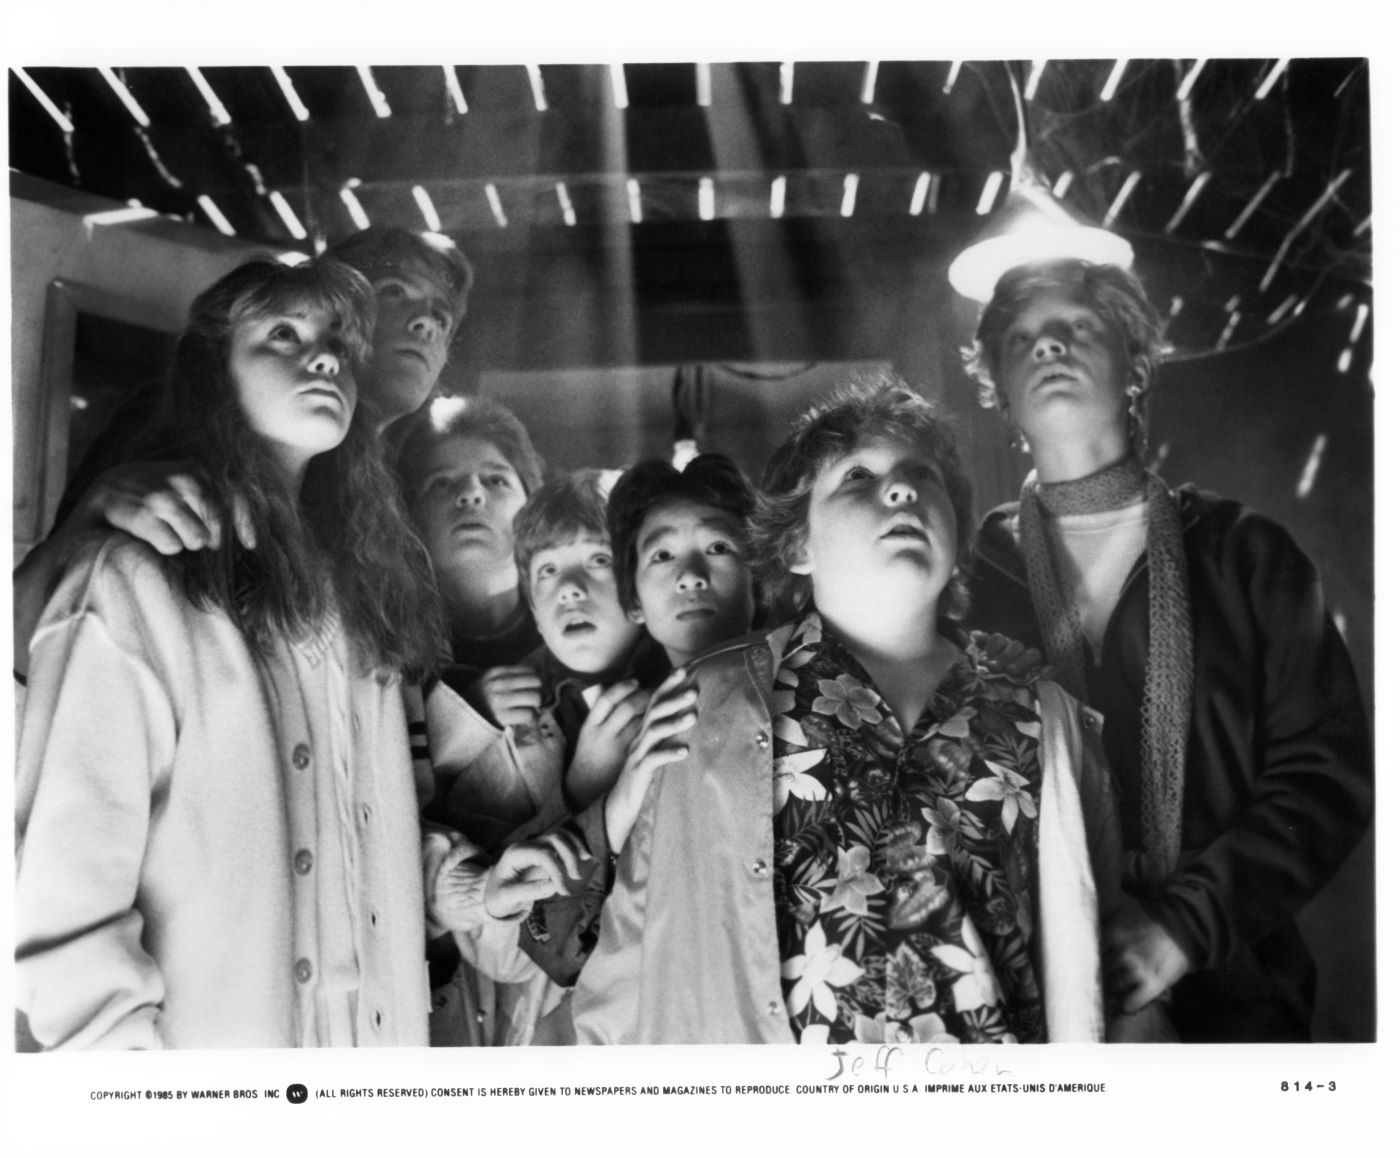 Several characters from 'The Goonies' gathered together underneath a floor looking up in this black and white picture.